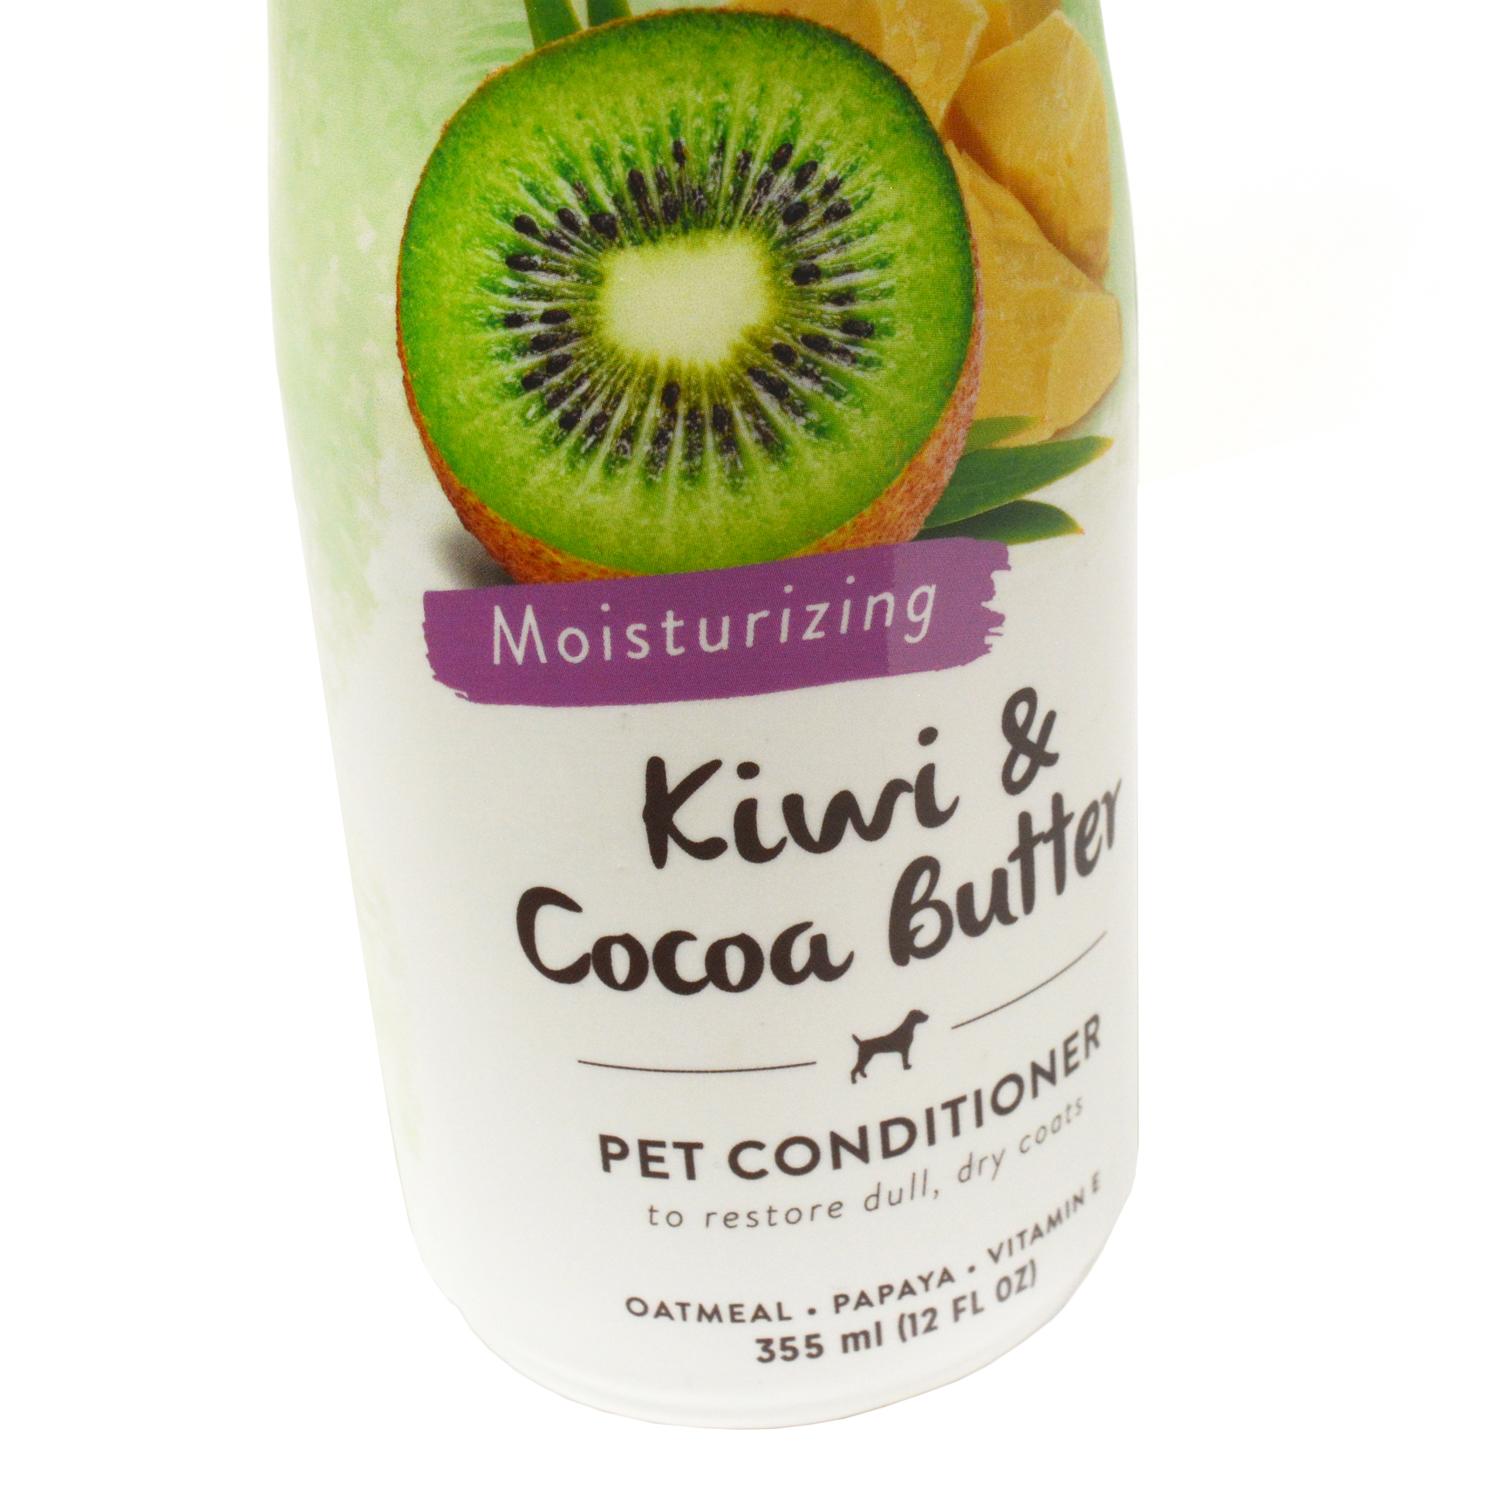 Close up of a bottle of Tropiclean Moisturising Kiwi and Cocoa Butter Pet Conditioner